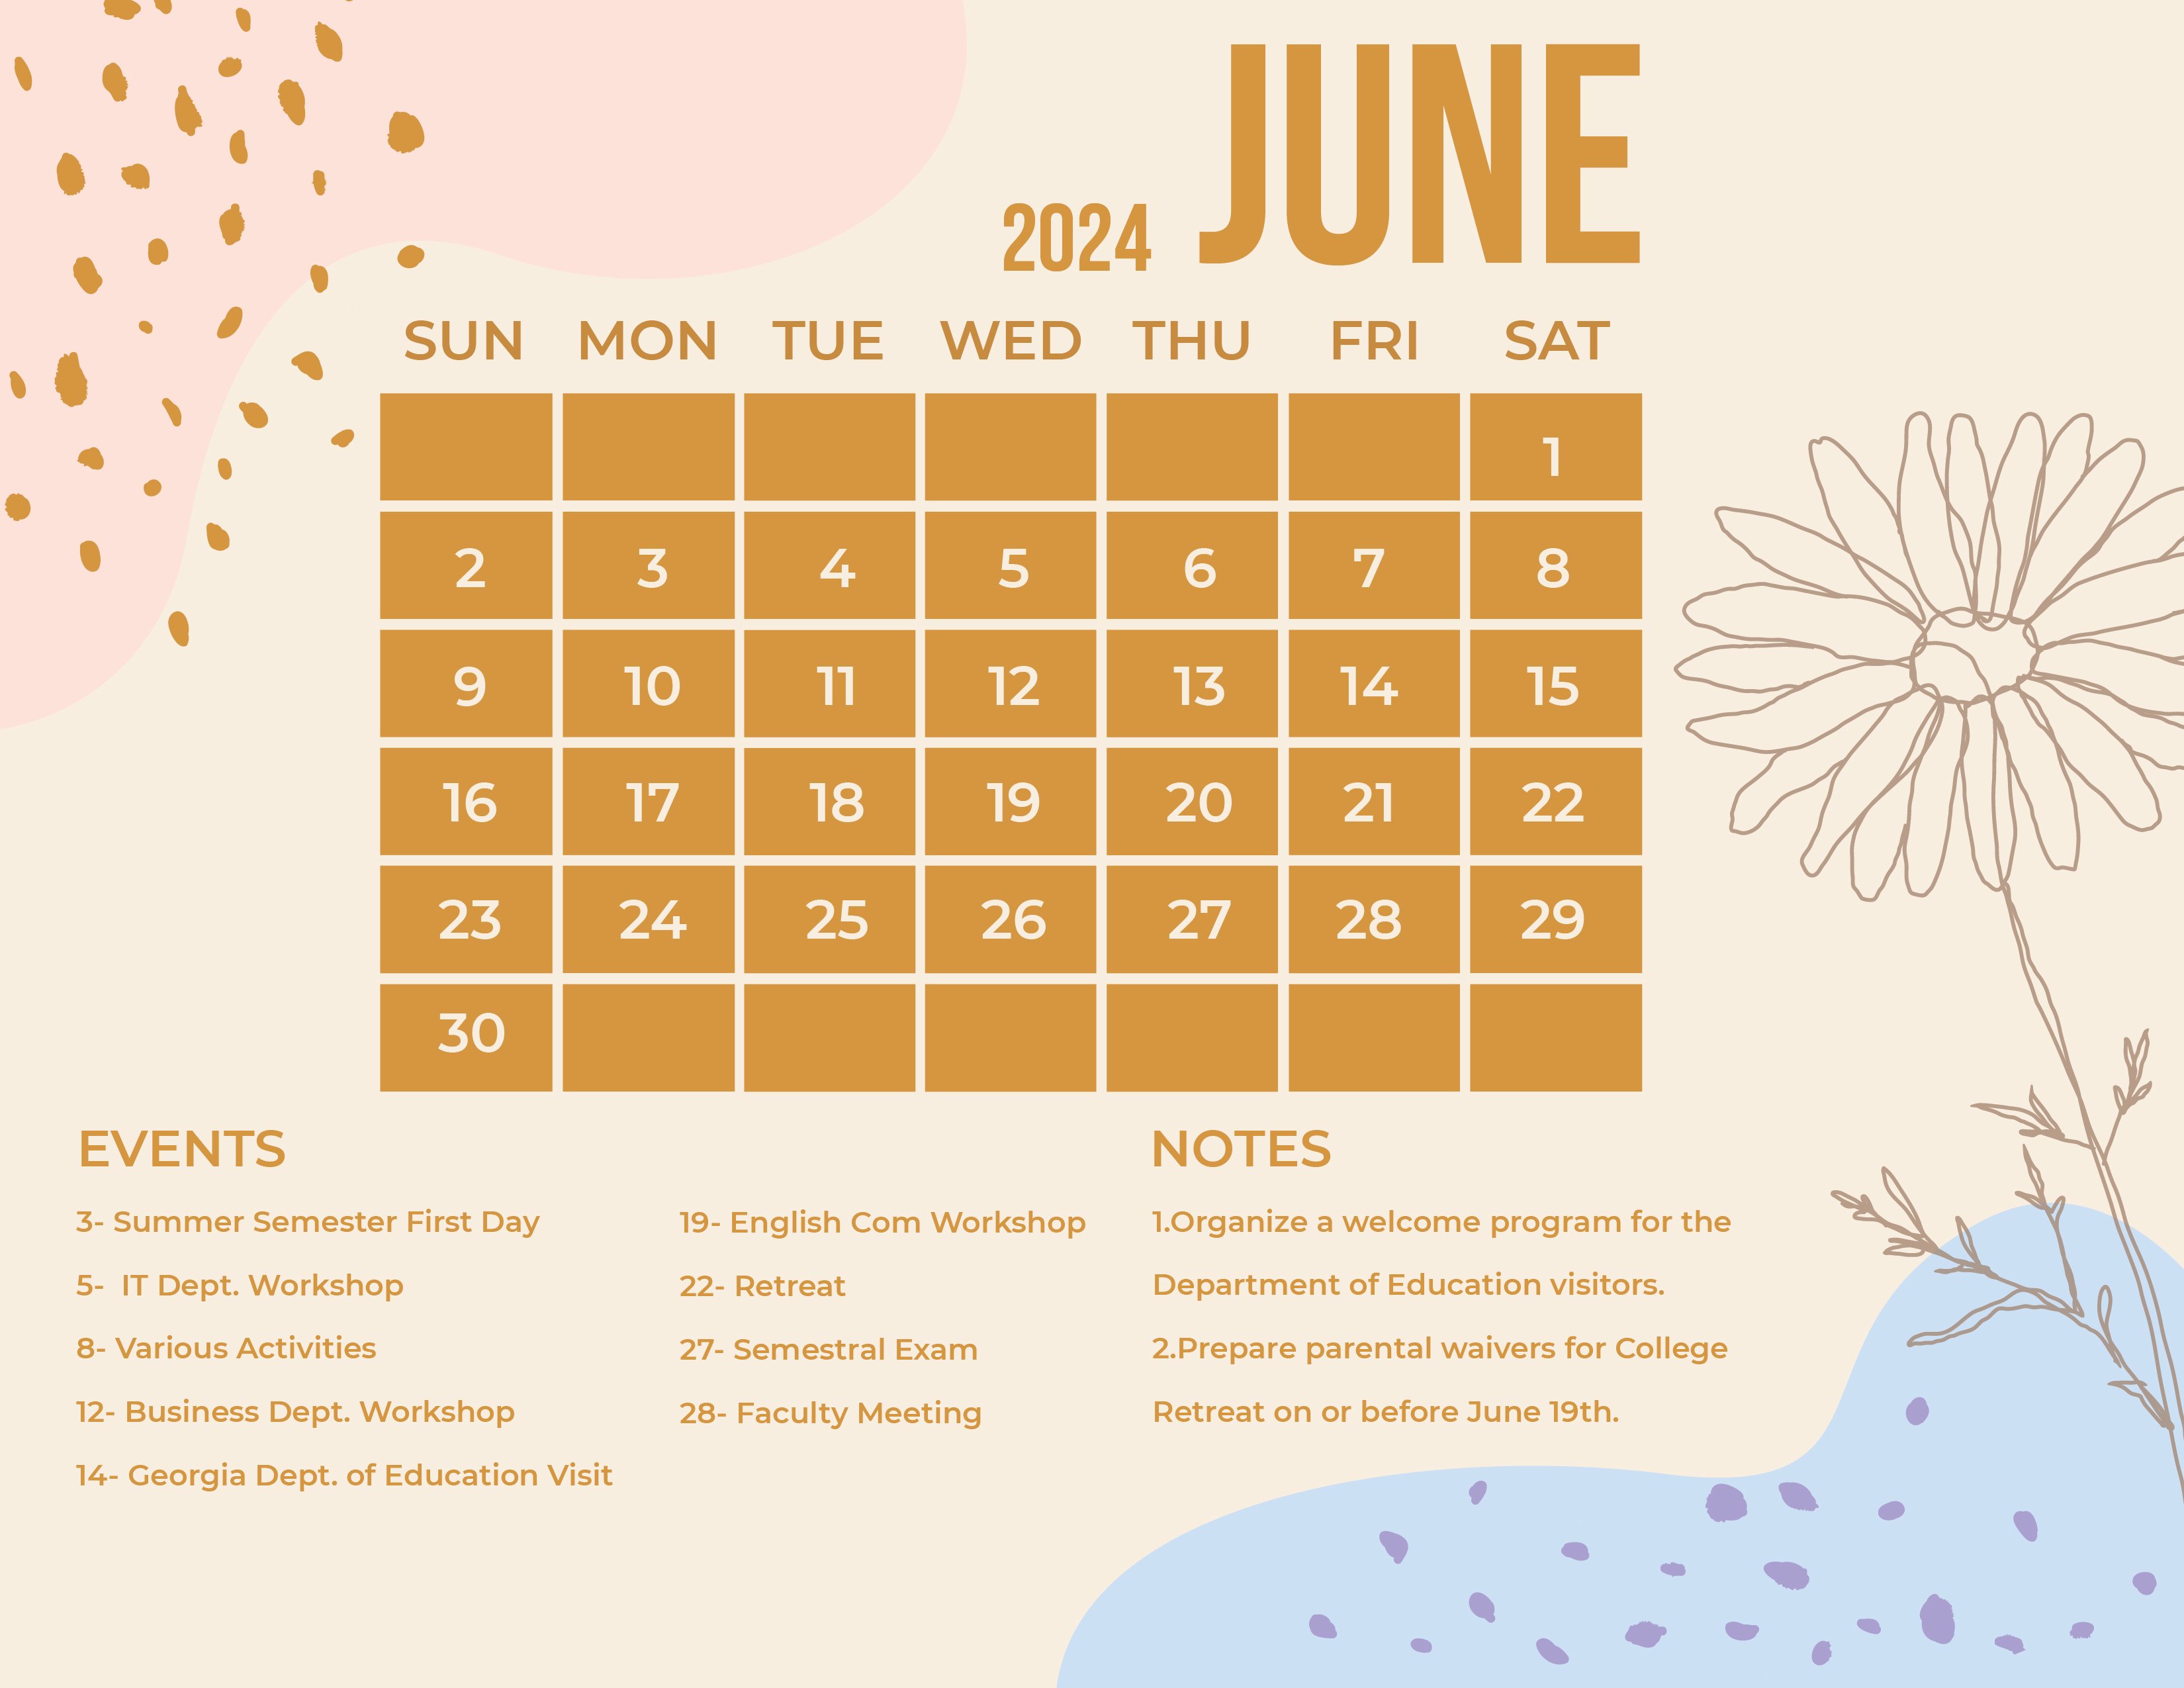 Free Colorful June 2023 Calendar - Download in Word, Google Docs, Illustrator, PSD, Apple Pages 